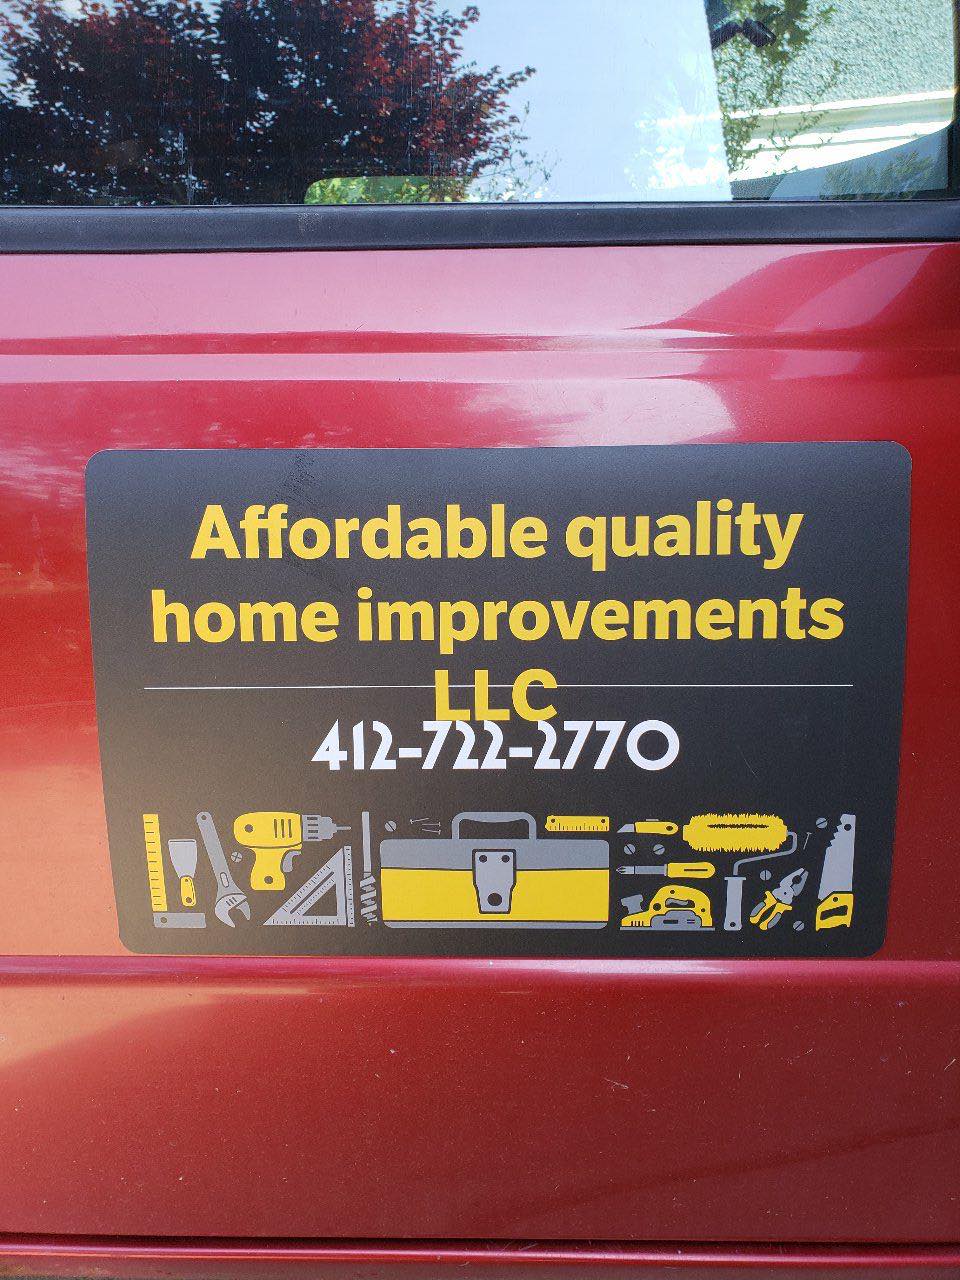 Affordable Quality Home Improvements Llc 1406 Louise St, West Homestead Pennsylvania 15120